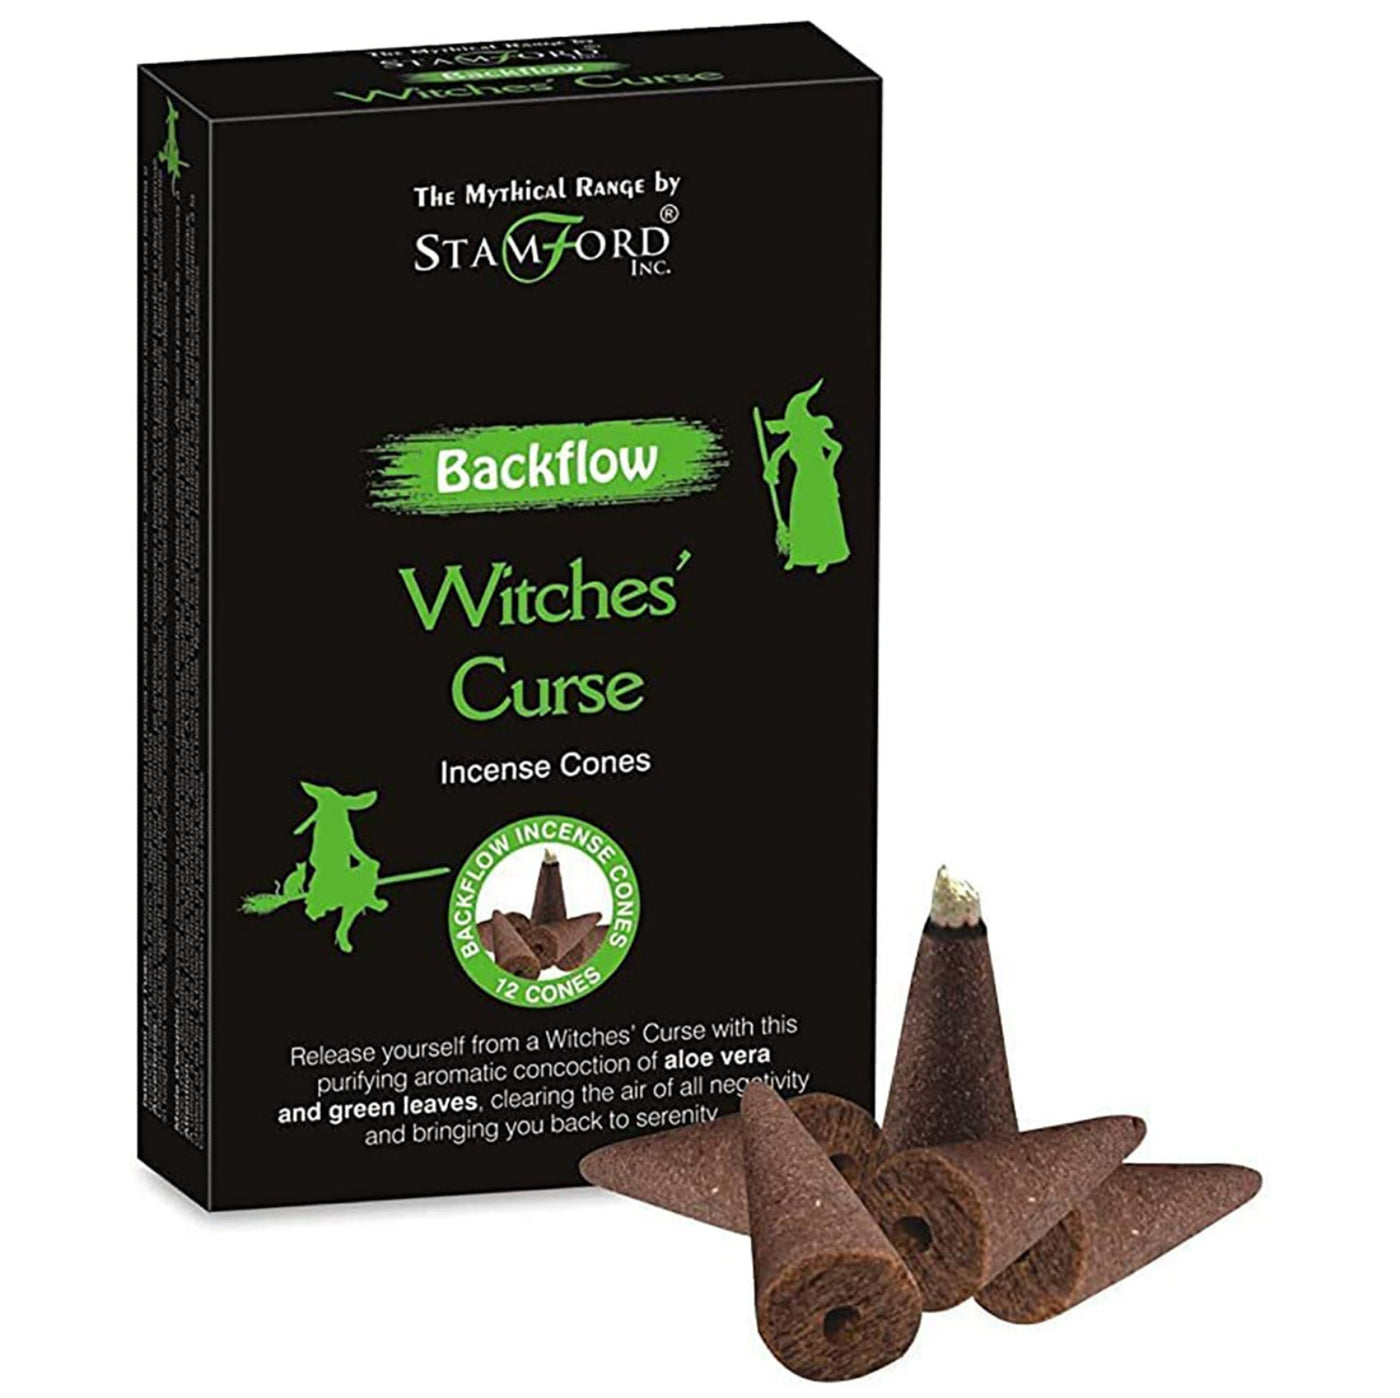 Stamford Witches's Brew Backflow Cones - Aloe Vera & Green Leaves.